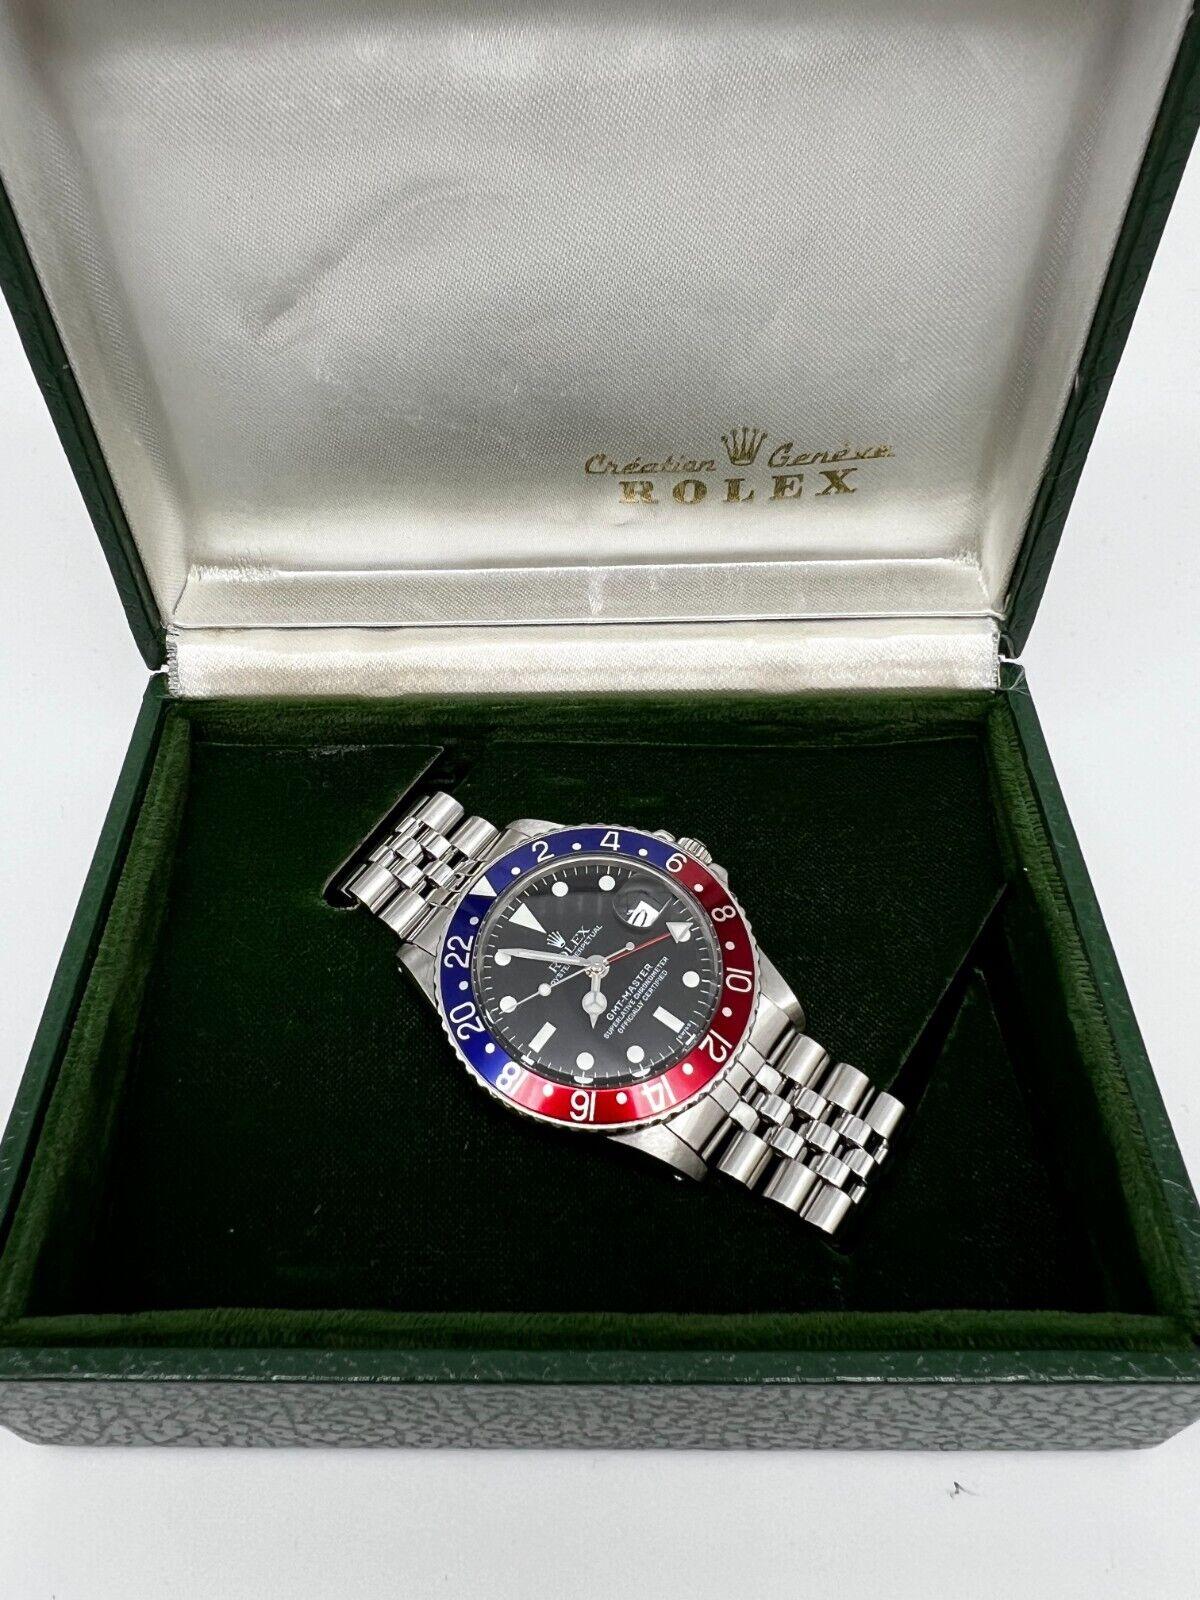 Style Number: 1675

Serial: 1318***

Year: 1966
 
Model: GMT Master
 
Case Material: Stainless Steel
 
Band: Stainless Steel
 
Bezel: Pepsi - Red and Blue 
 
Dial: Black
 
Face: Acrylic 
 
Case Size: 40mm 
 
Includes: 
-Rolex Watch Box
-Certified